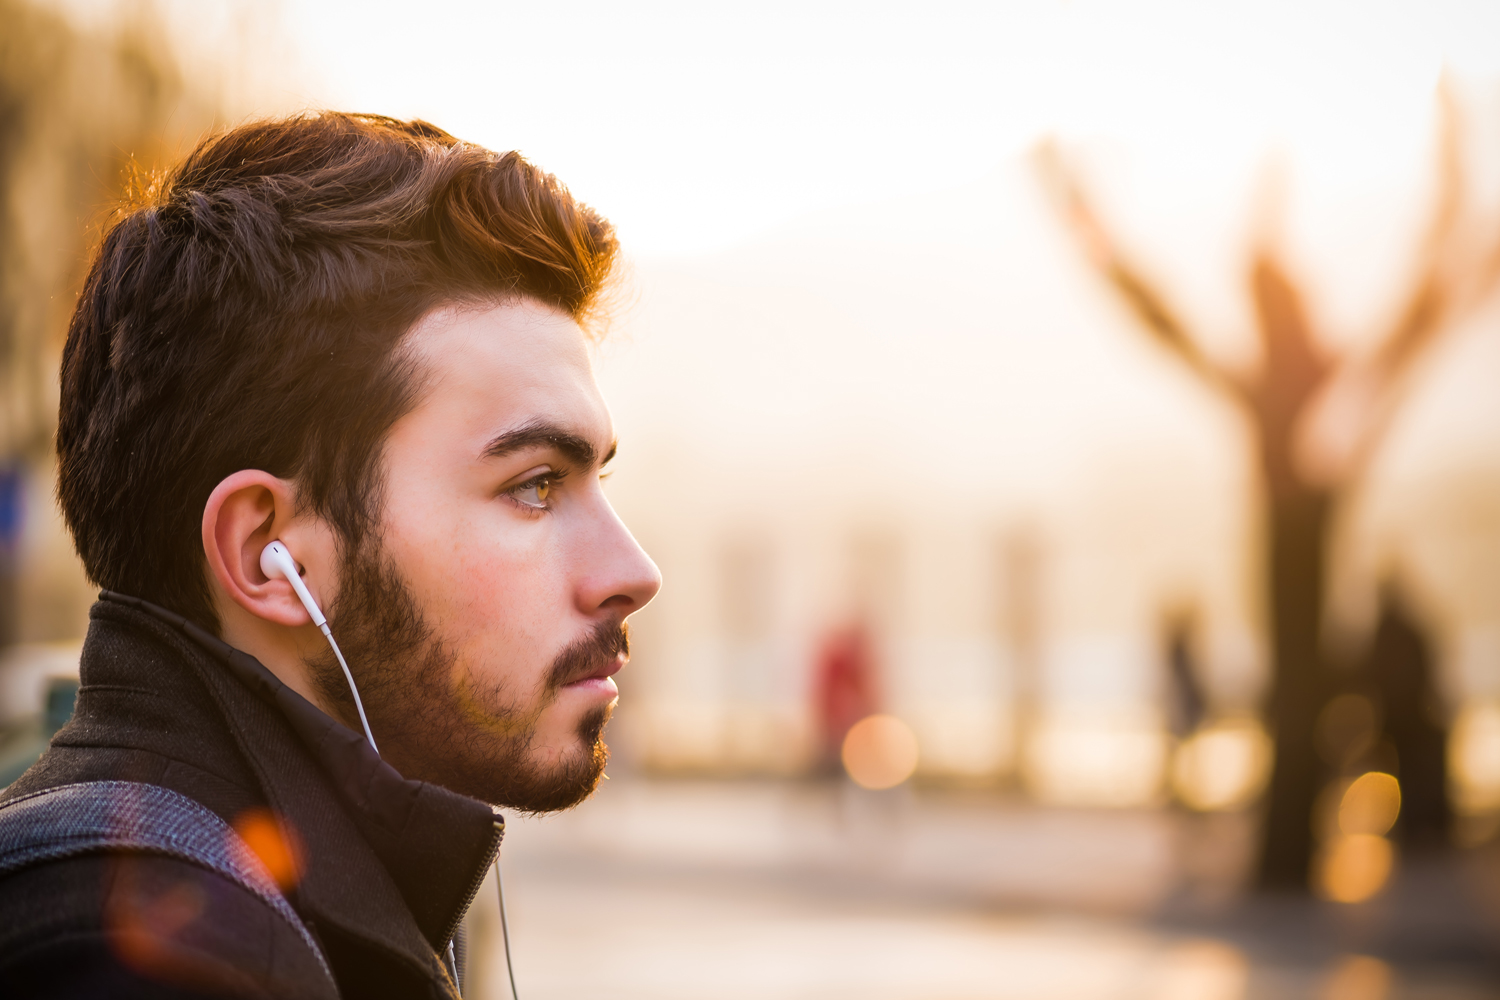 4 Ways Music Helps Listeners Cope With Life And Feel Understood